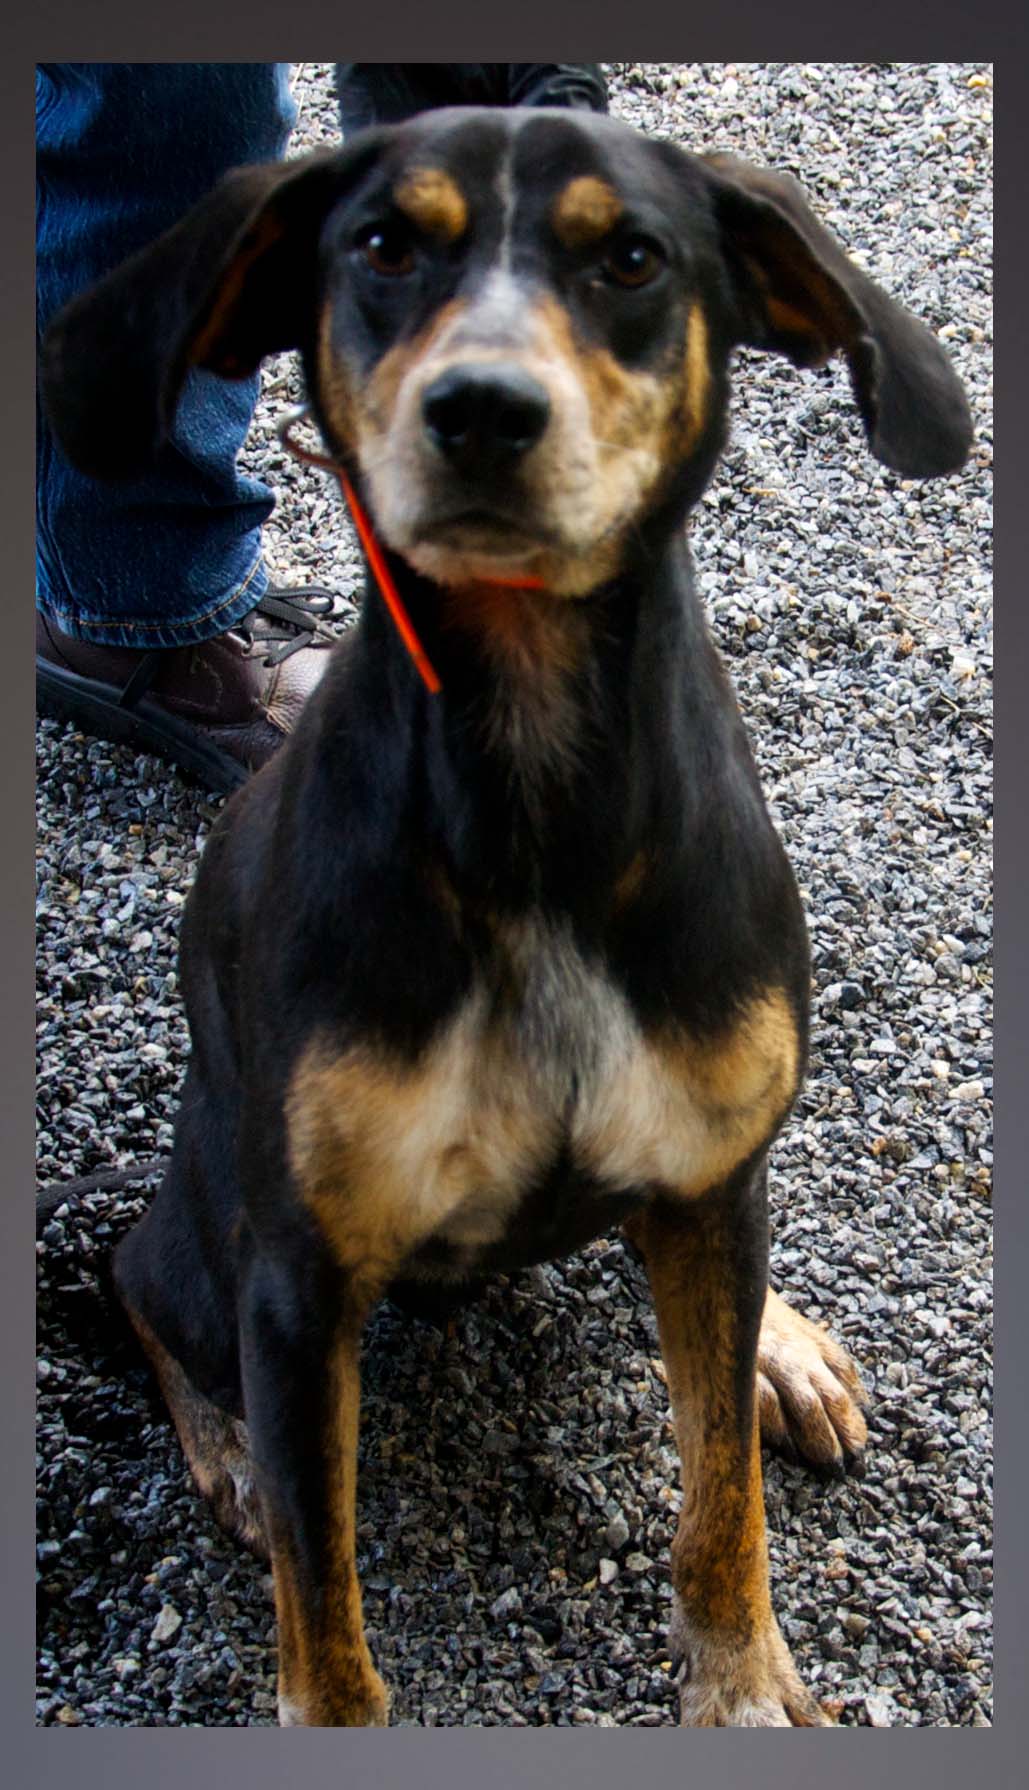 This male Hound was picked up on Old Highway 76 in Morganton September 14. He has a black and brown coat. View this playful boy using intake number 322-21.